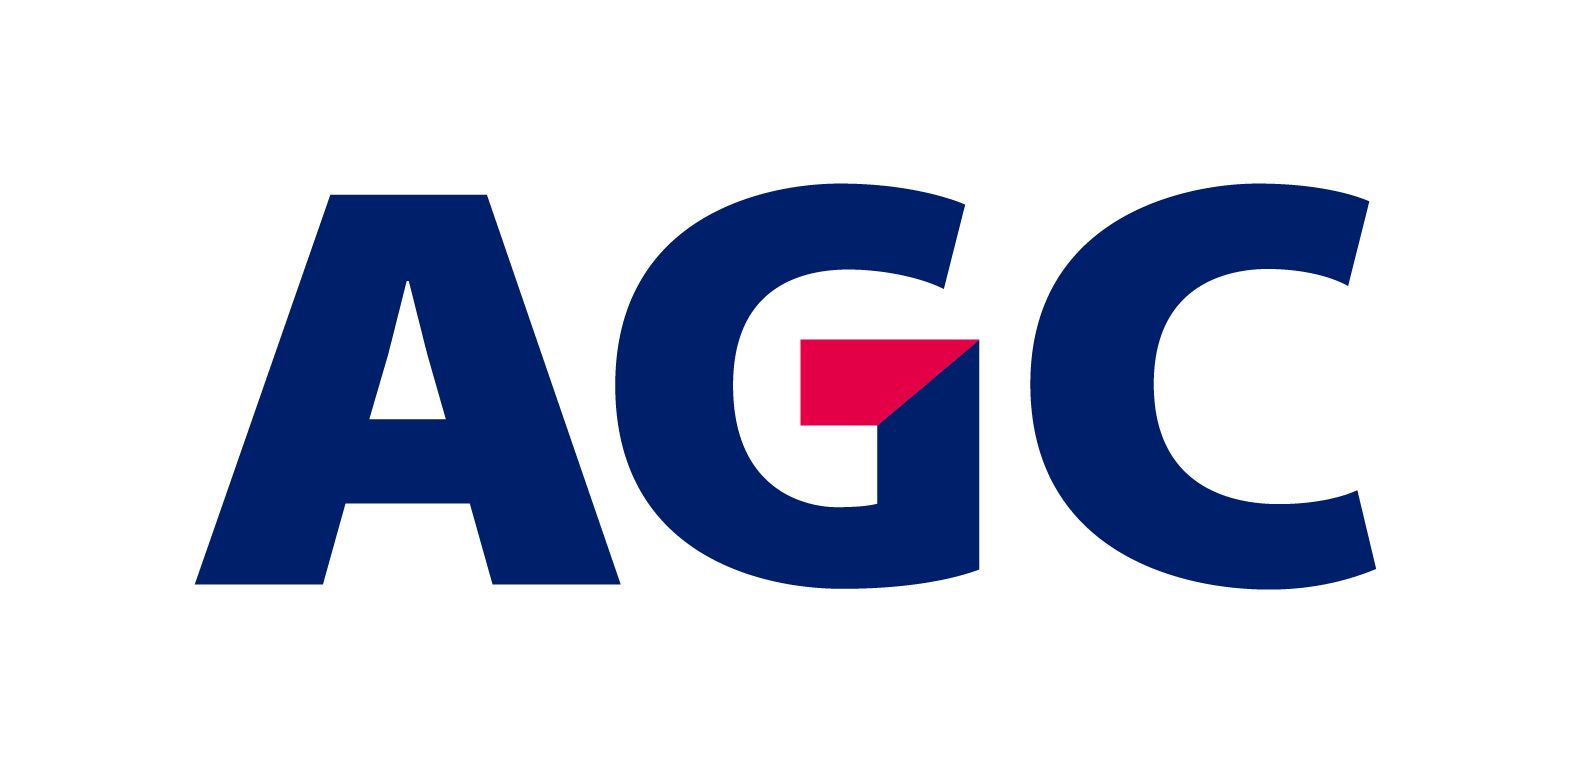 AGC works with The House of Marketing